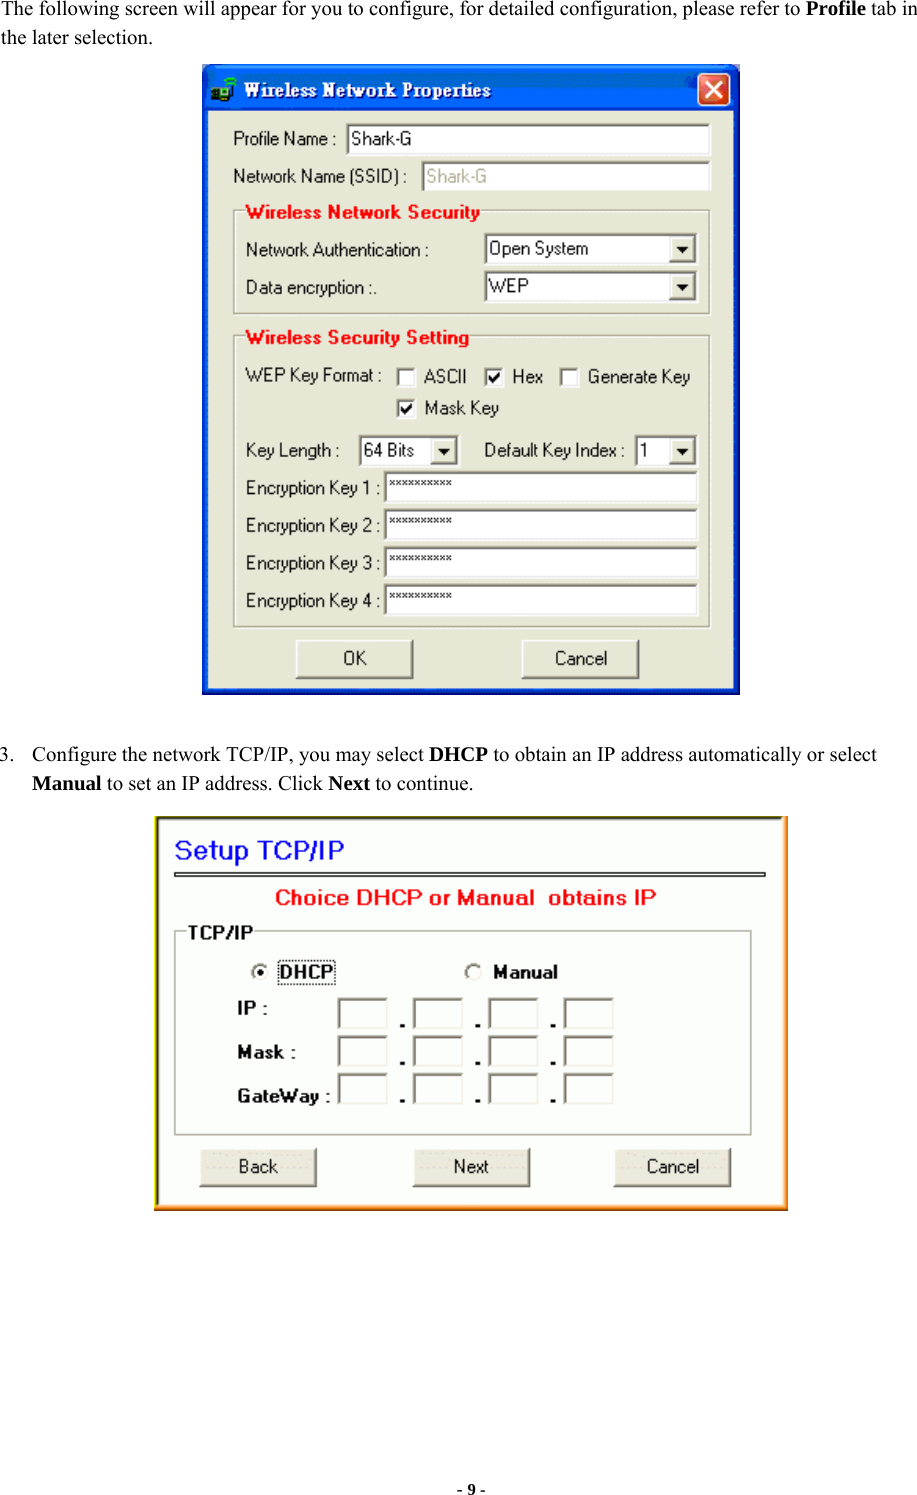 - 9 -  The following screen will appear for you to configure, for detailed configuration, please refer to Profile tab in the later selection.     3. Configure the network TCP/IP, you may select DHCP to obtain an IP address automatically or select Manual to set an IP address. Click Next to continue.     